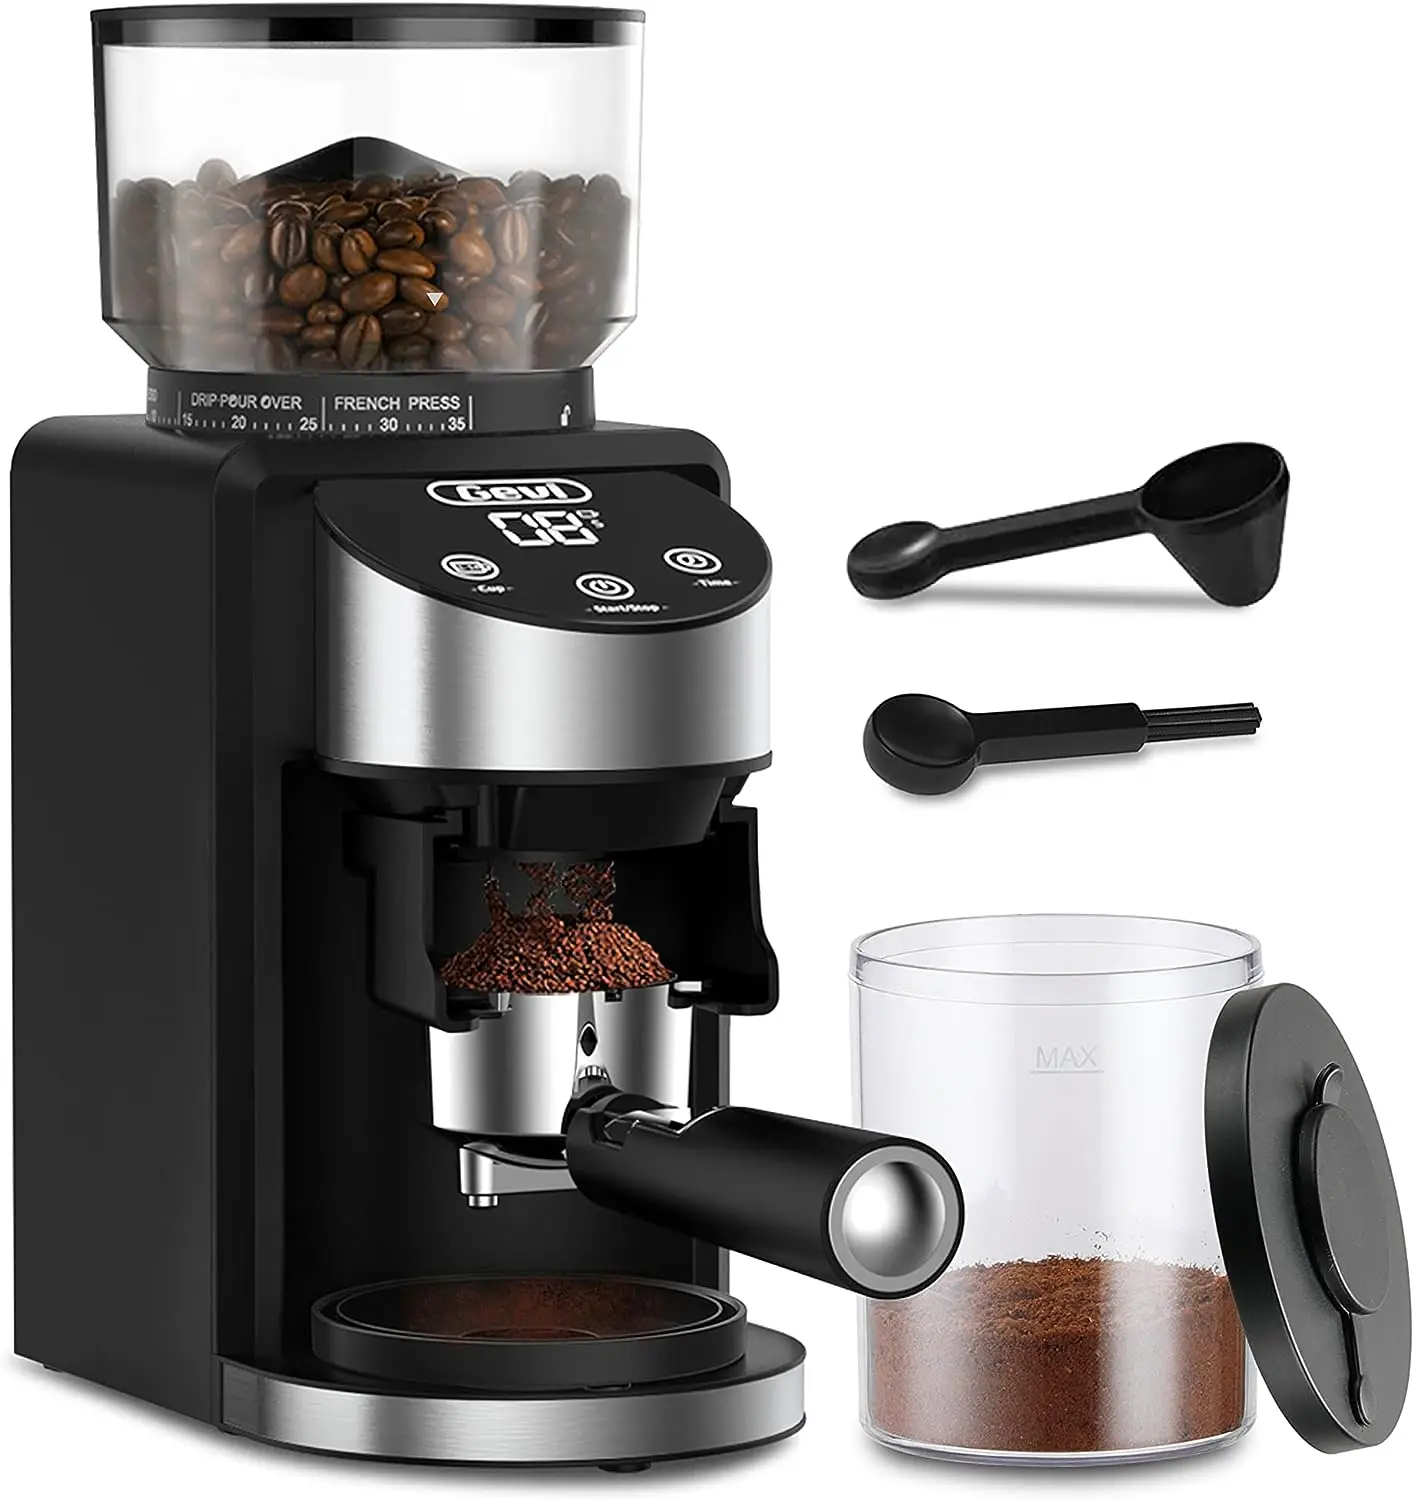 

Burr Coffee Grinder, Adjustable Burr Mill with 35 Precise Grind Settings, Electric Coffee Grinder for Espresso/Drip/Percolator/F